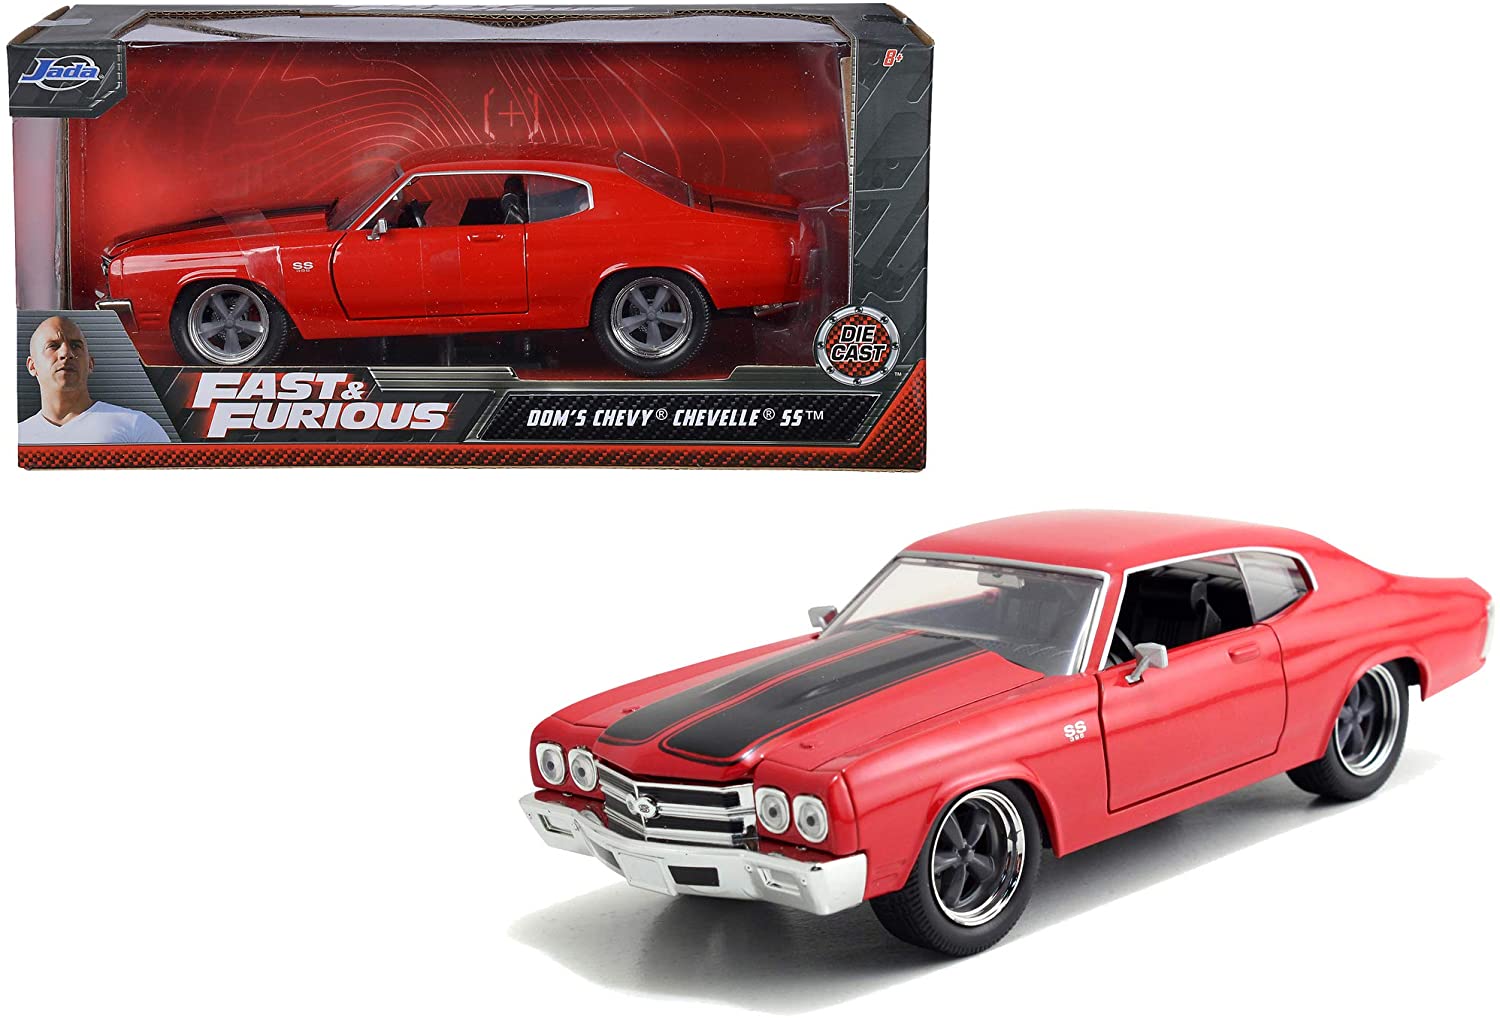 Fast & Furious 1970 Chevy Chevelle Die Cast 1:24